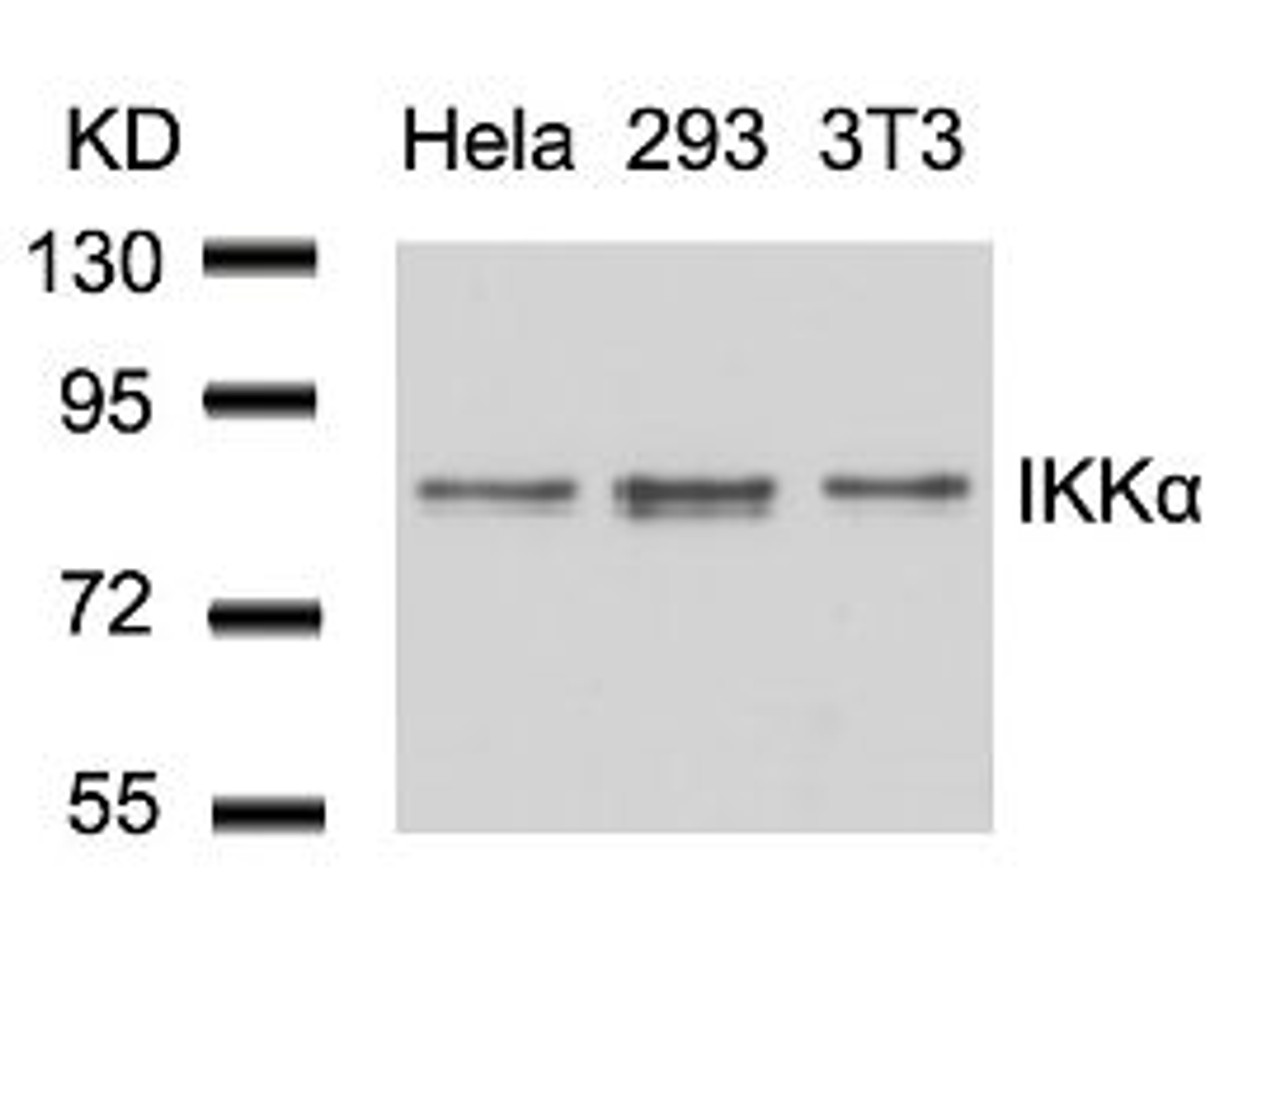 Western blot analysis of lysed extracts from HeLa, 293 and 3T3 cells using IKK &#945; (Ab-23) .